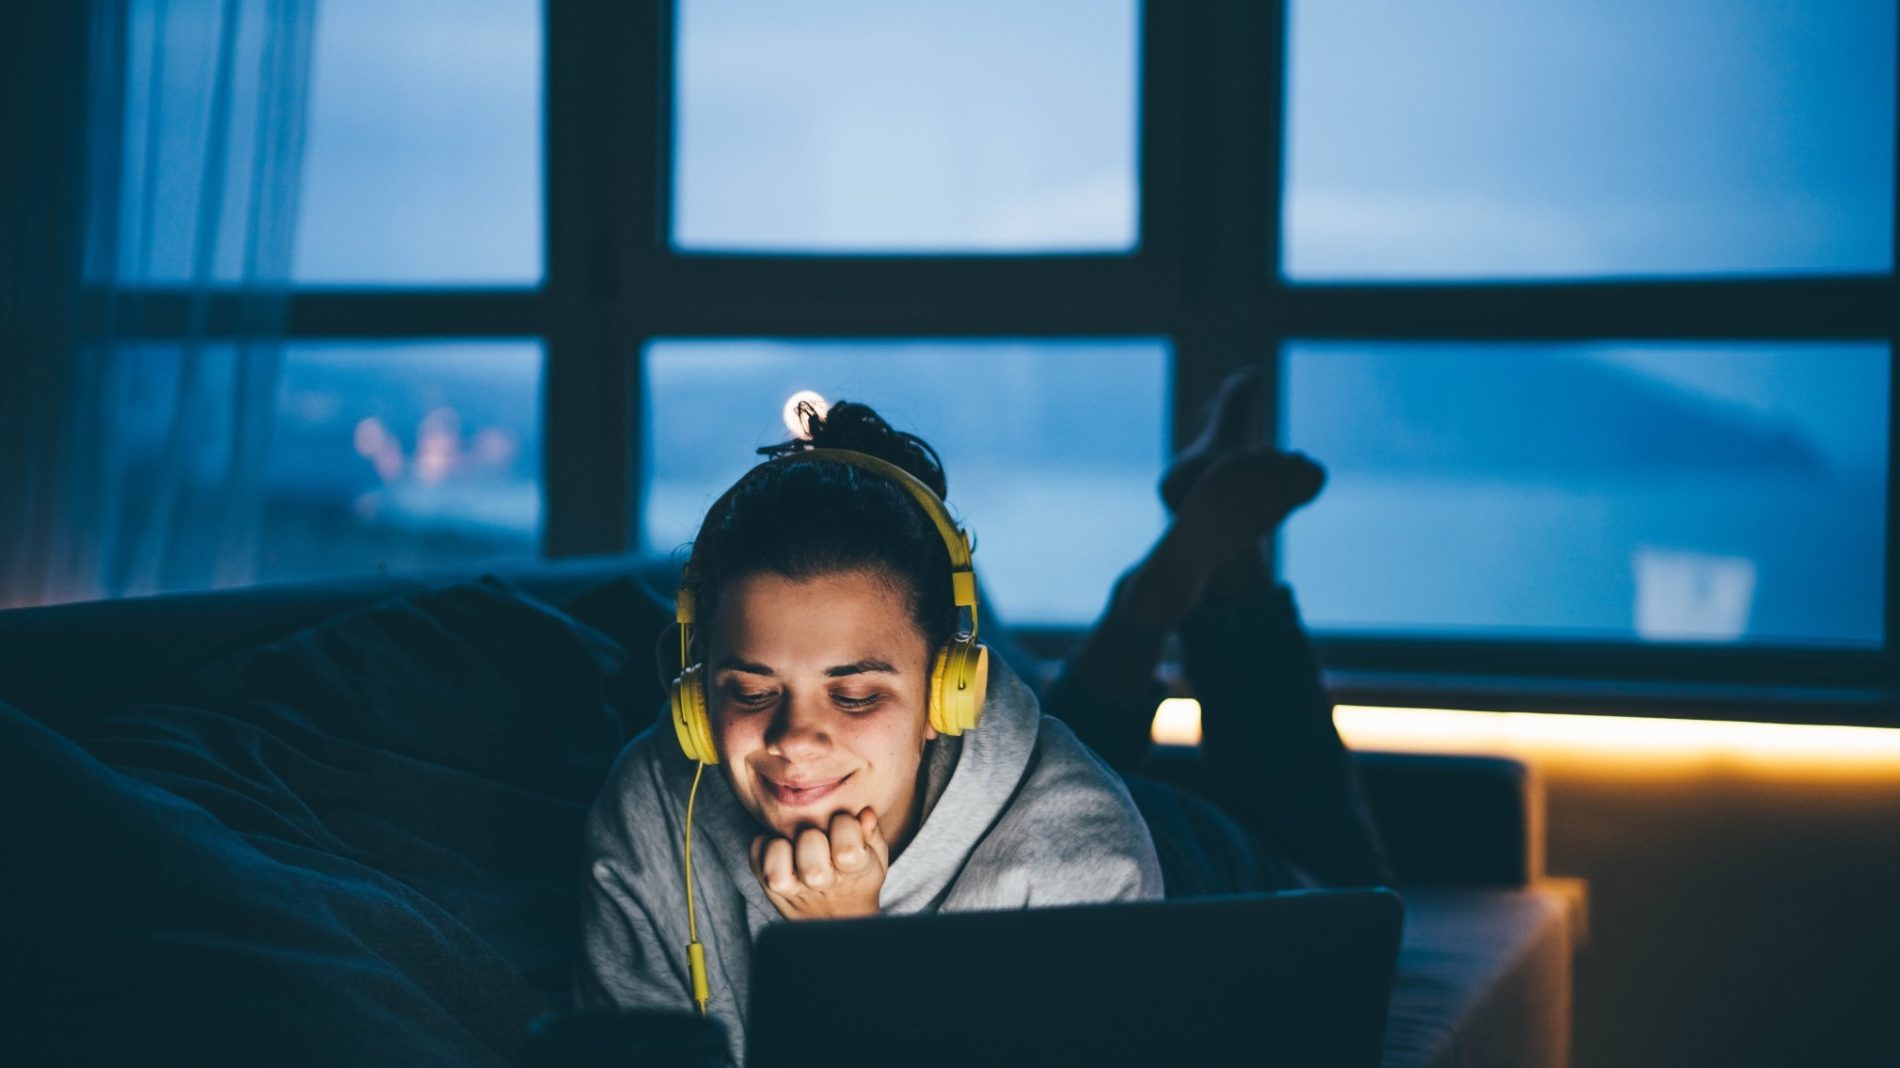 Young person listening to a podcast at night